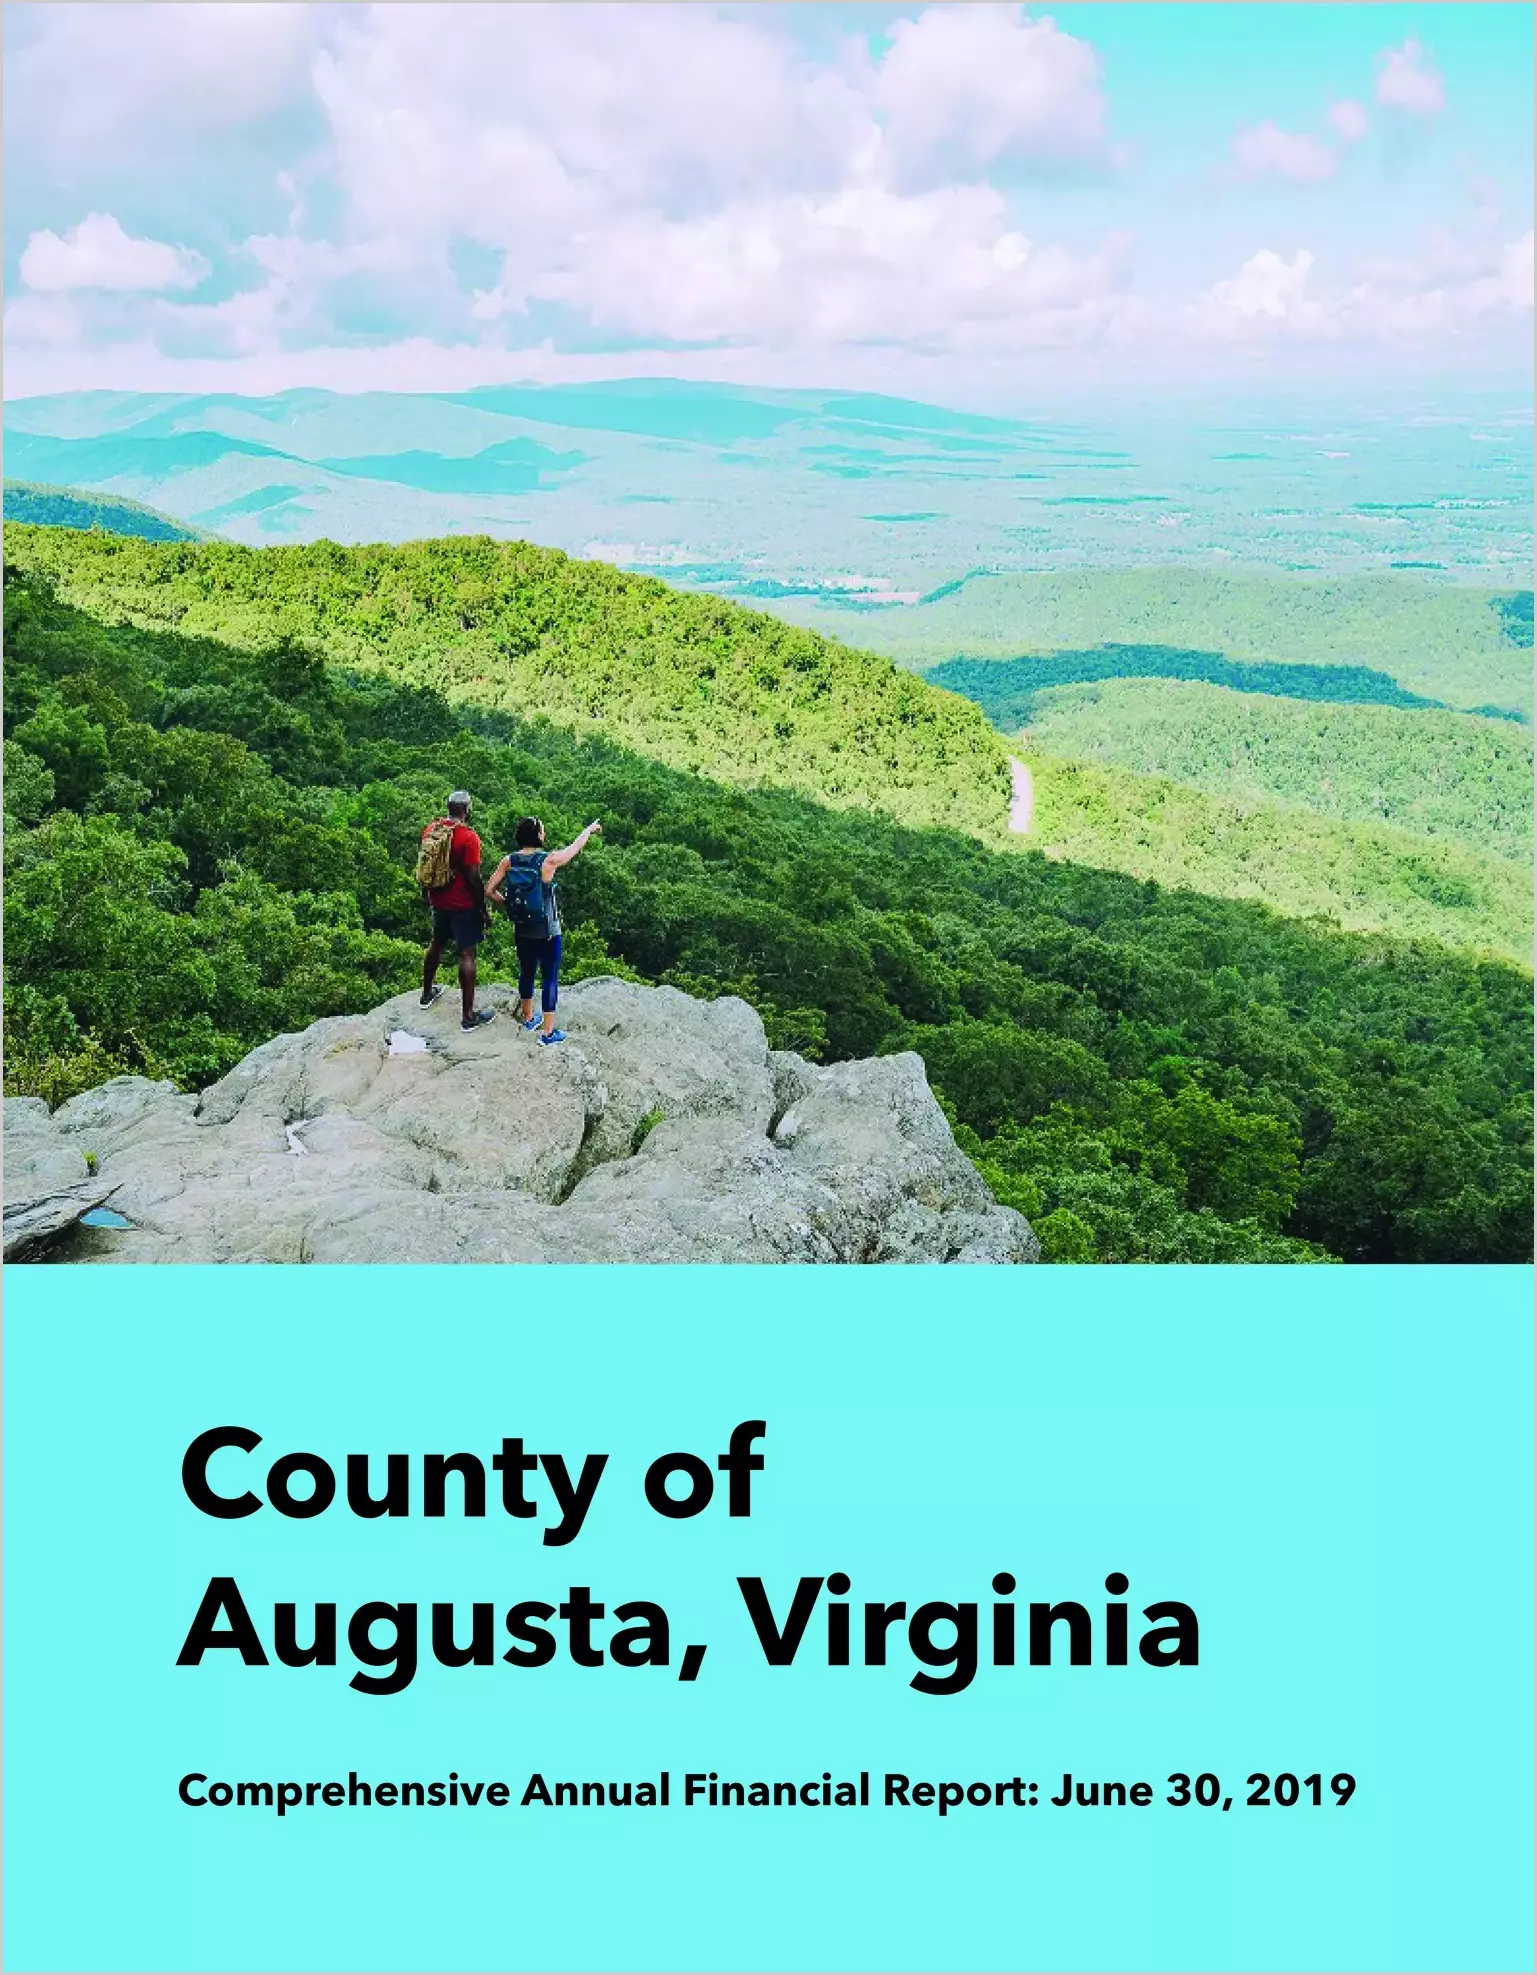 2019 Annual Financial Report for County of Augusta